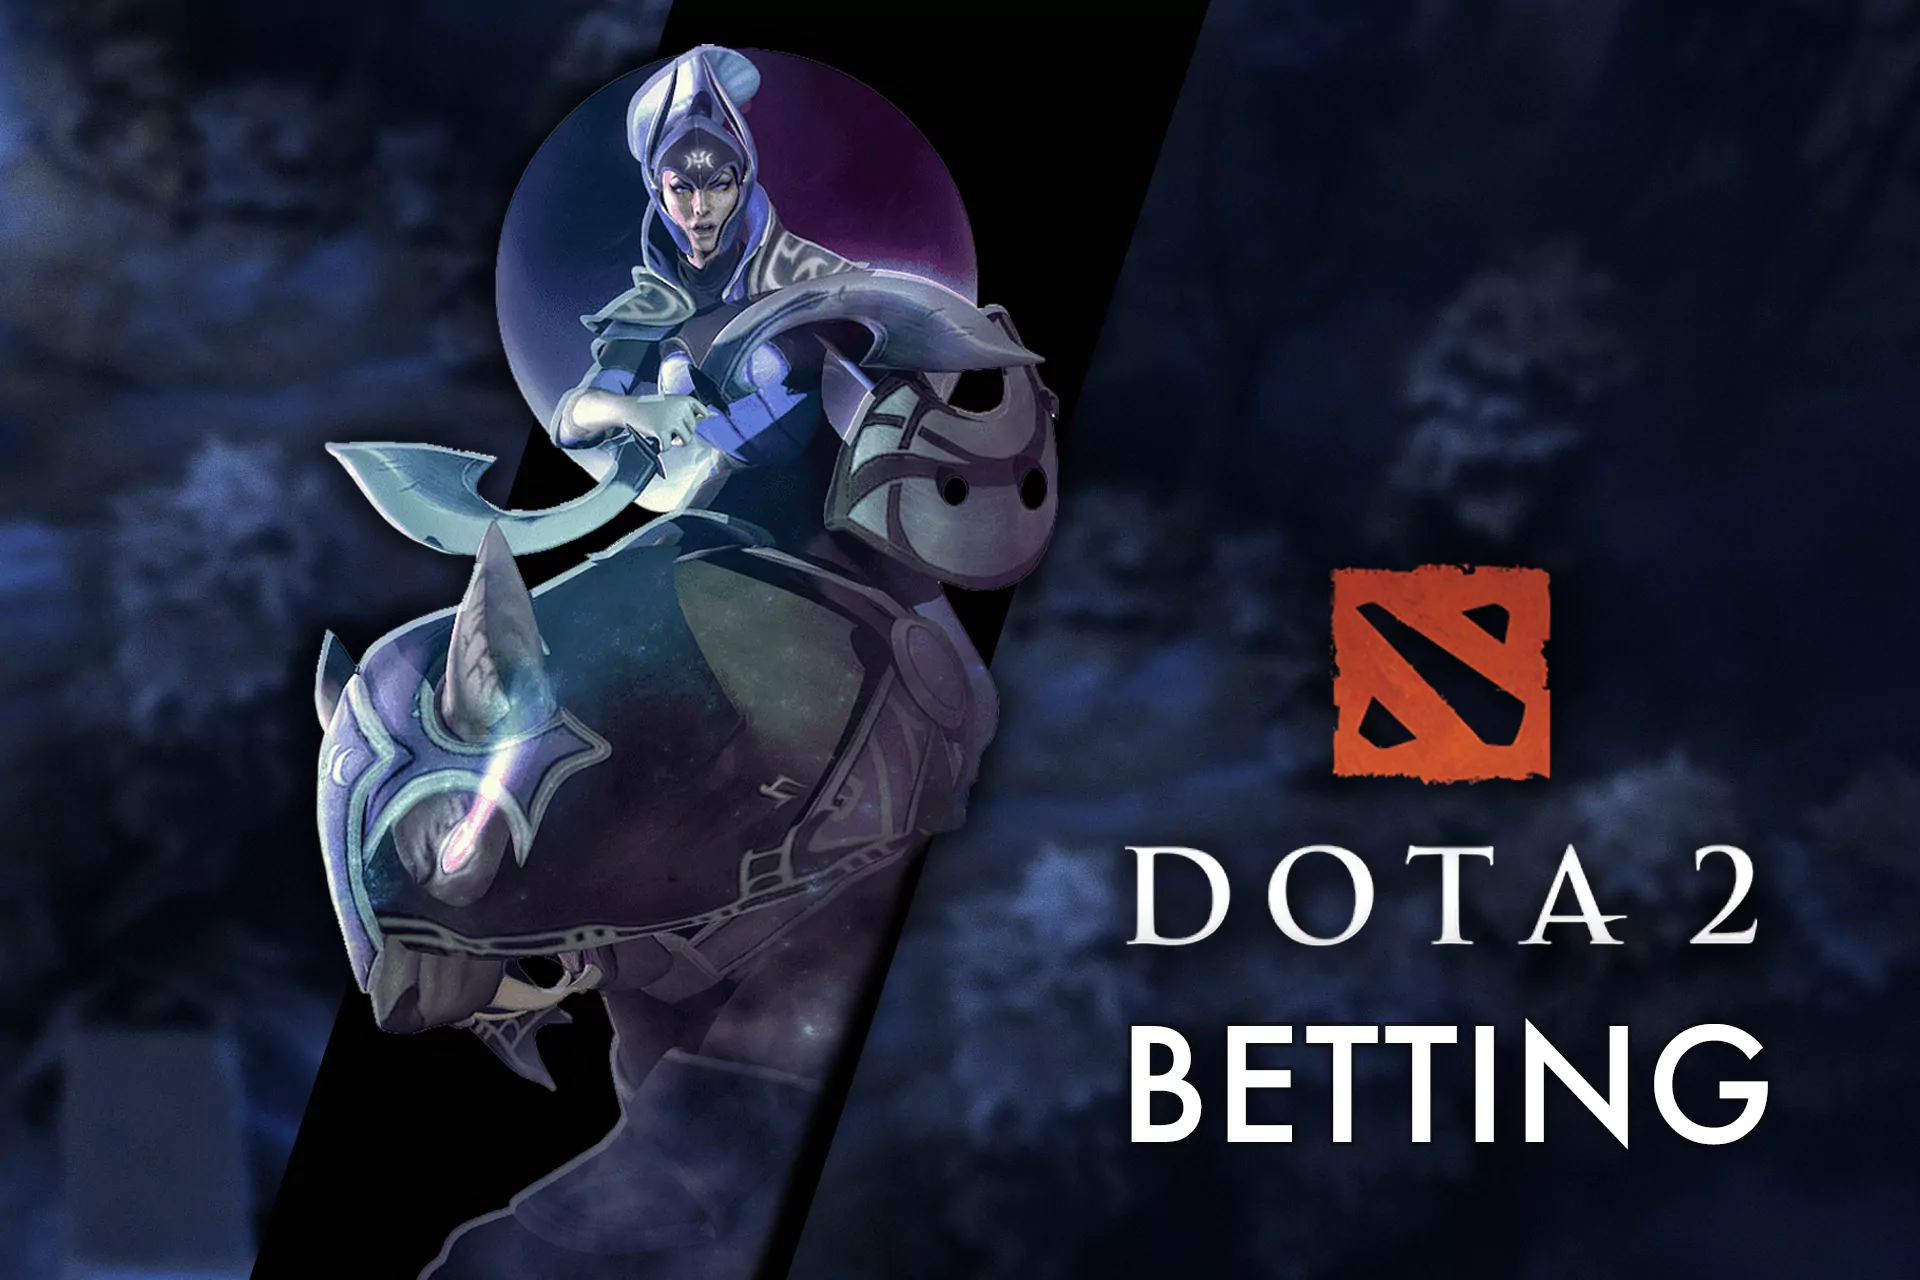 If you are a fan of the Dota 2, pick a betting site and sign up to place bets on your favourite team.